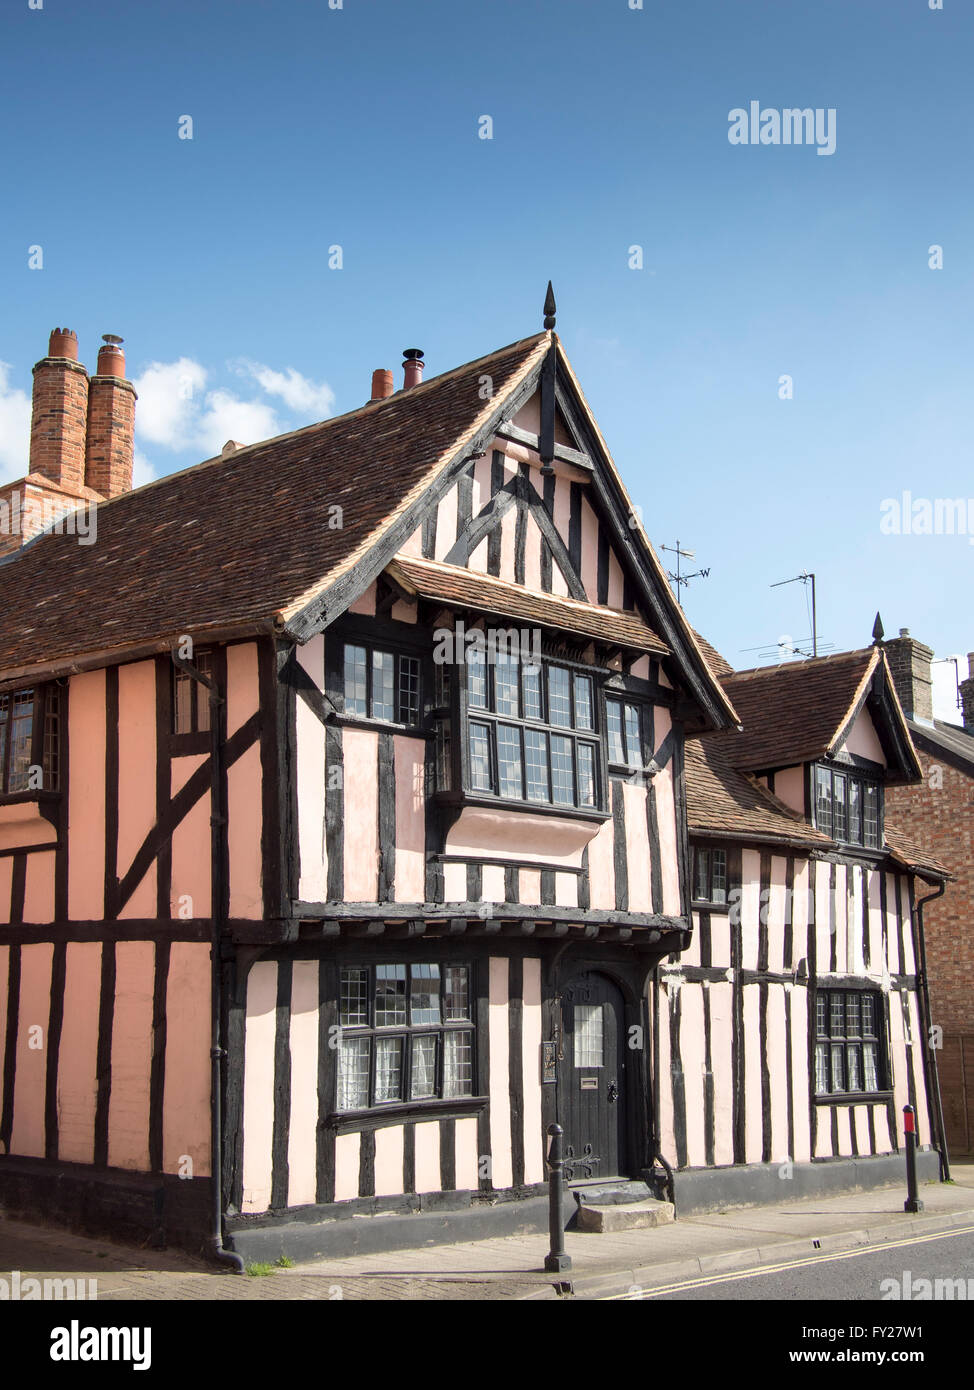 The exterior of the15th Century Old Moot Hall in Sudbury, Suffolk, England. Stock Photo